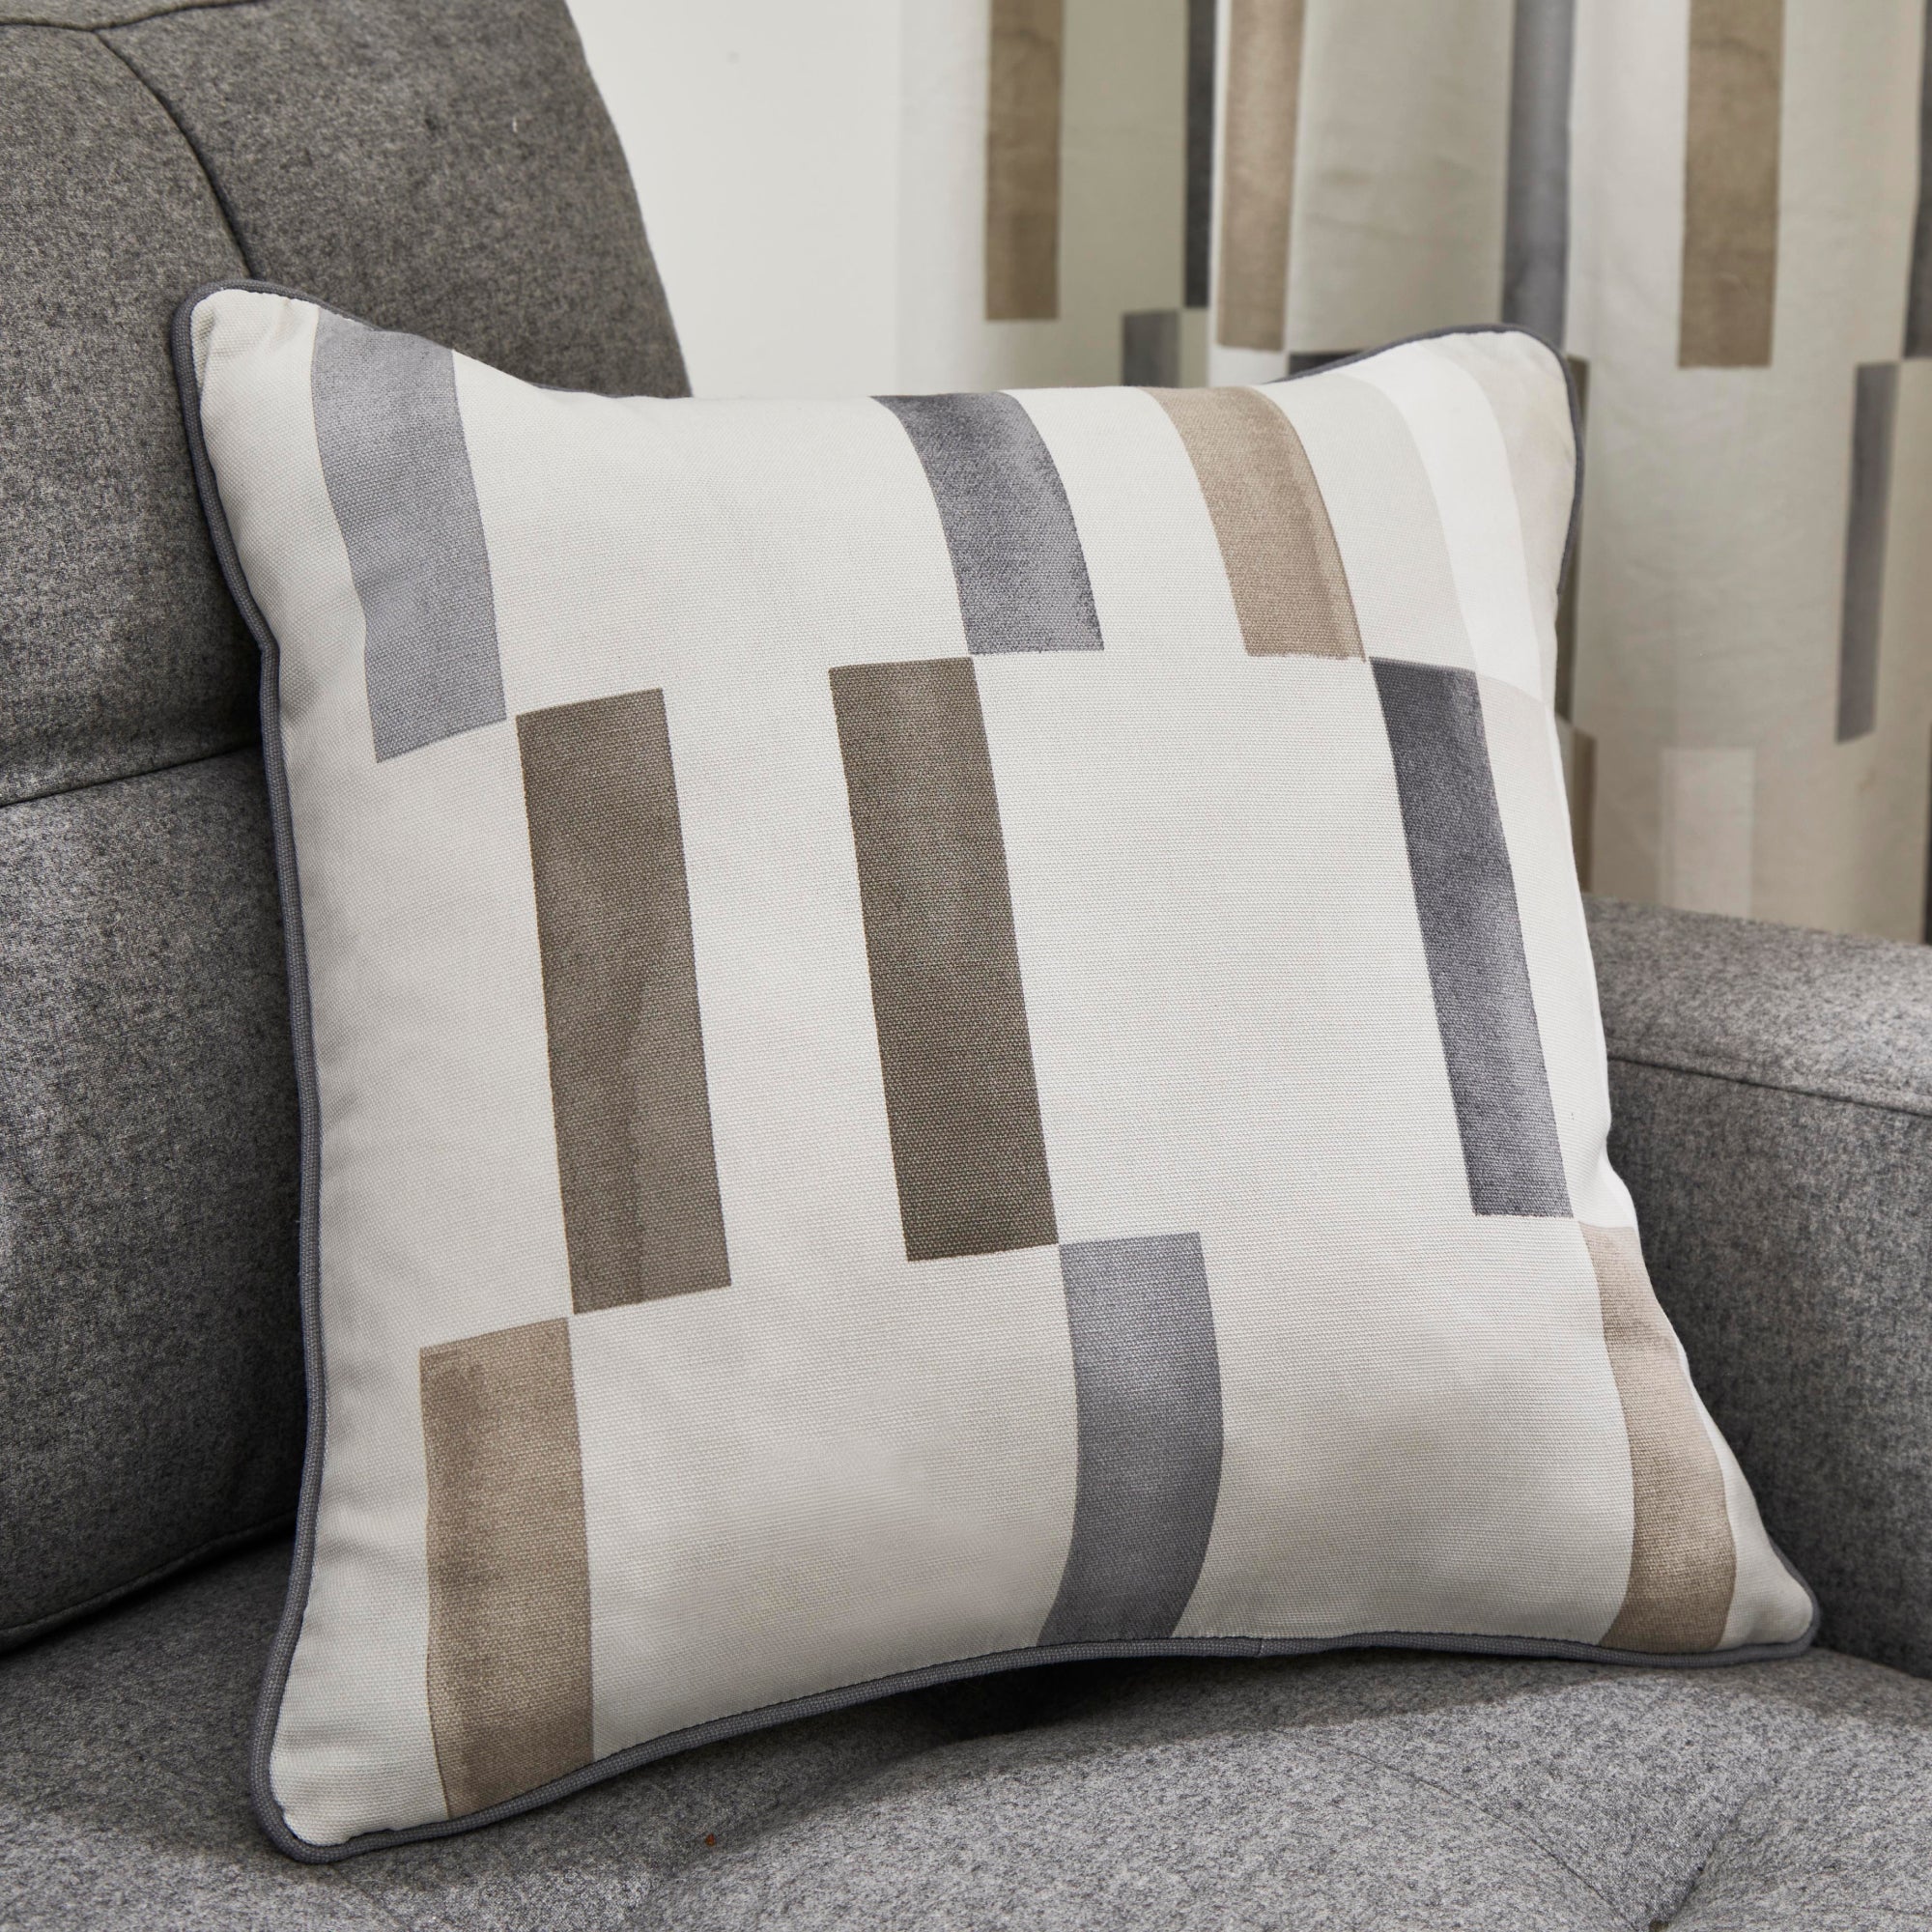 Filled Cushion Oakland by Fusion in Natural